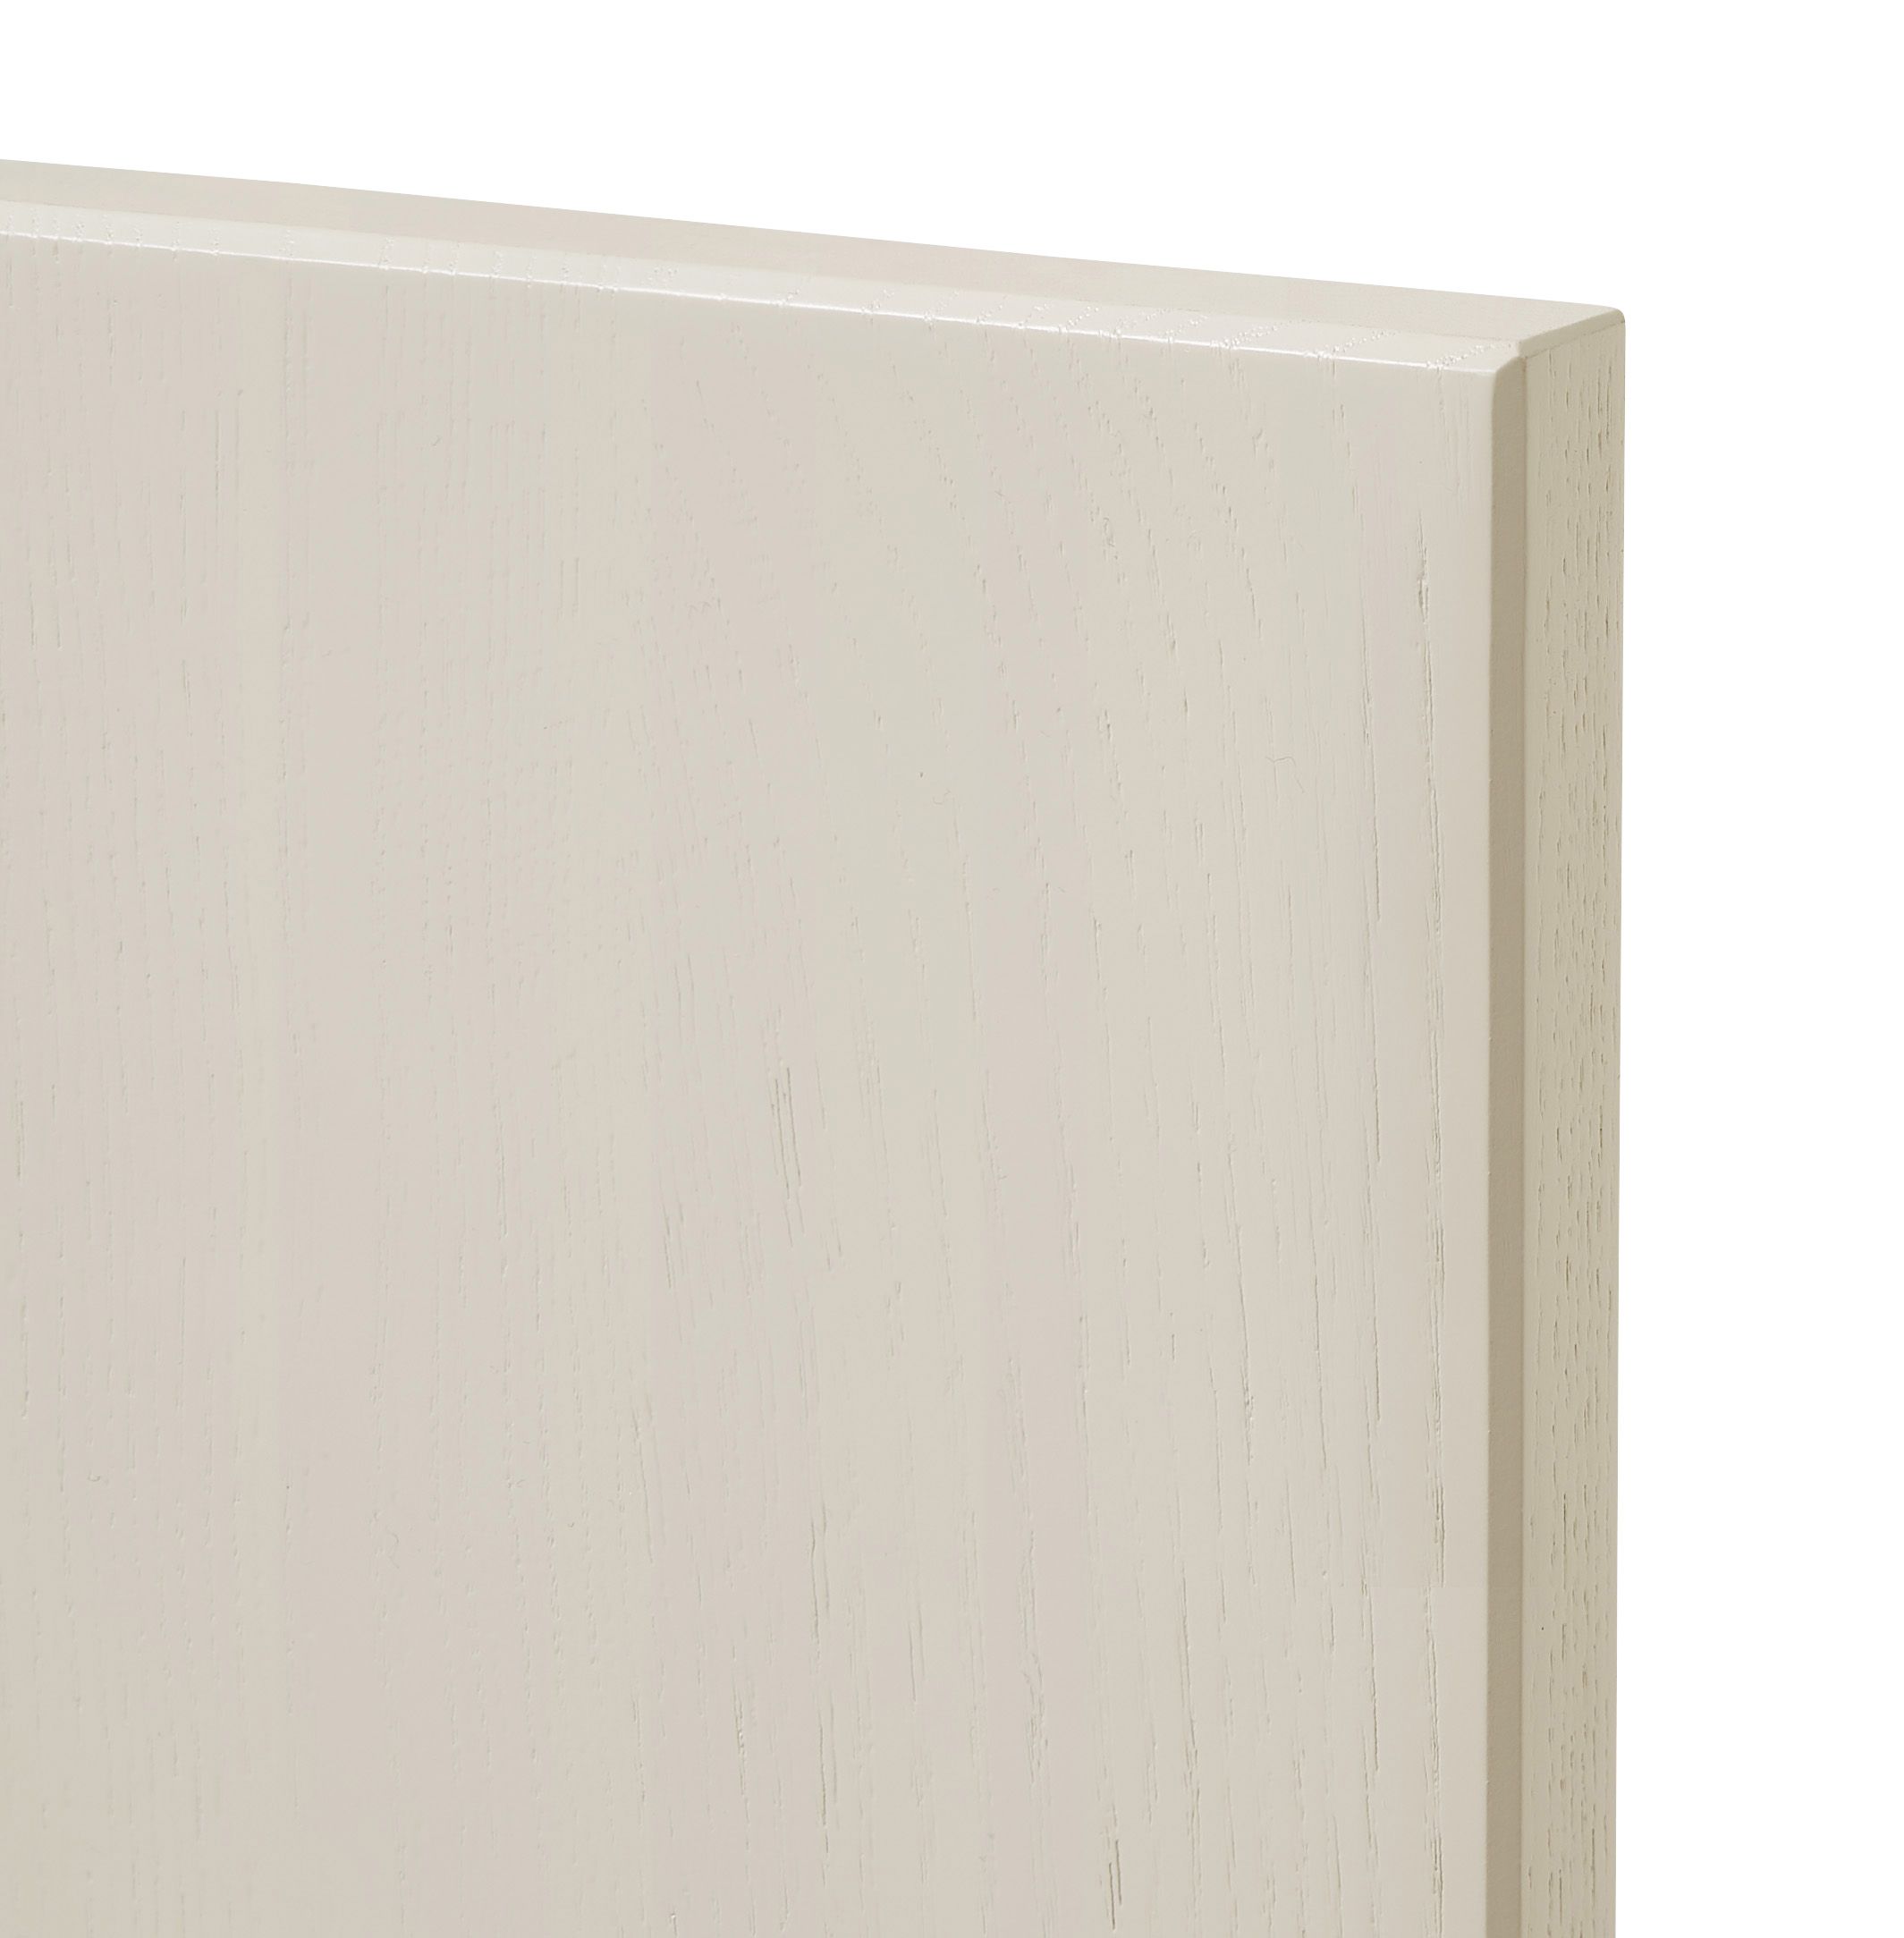 GoodHome Verbena Matt cashmere painted natural ash shaker Drawer front (W)400mm, Pack of 4